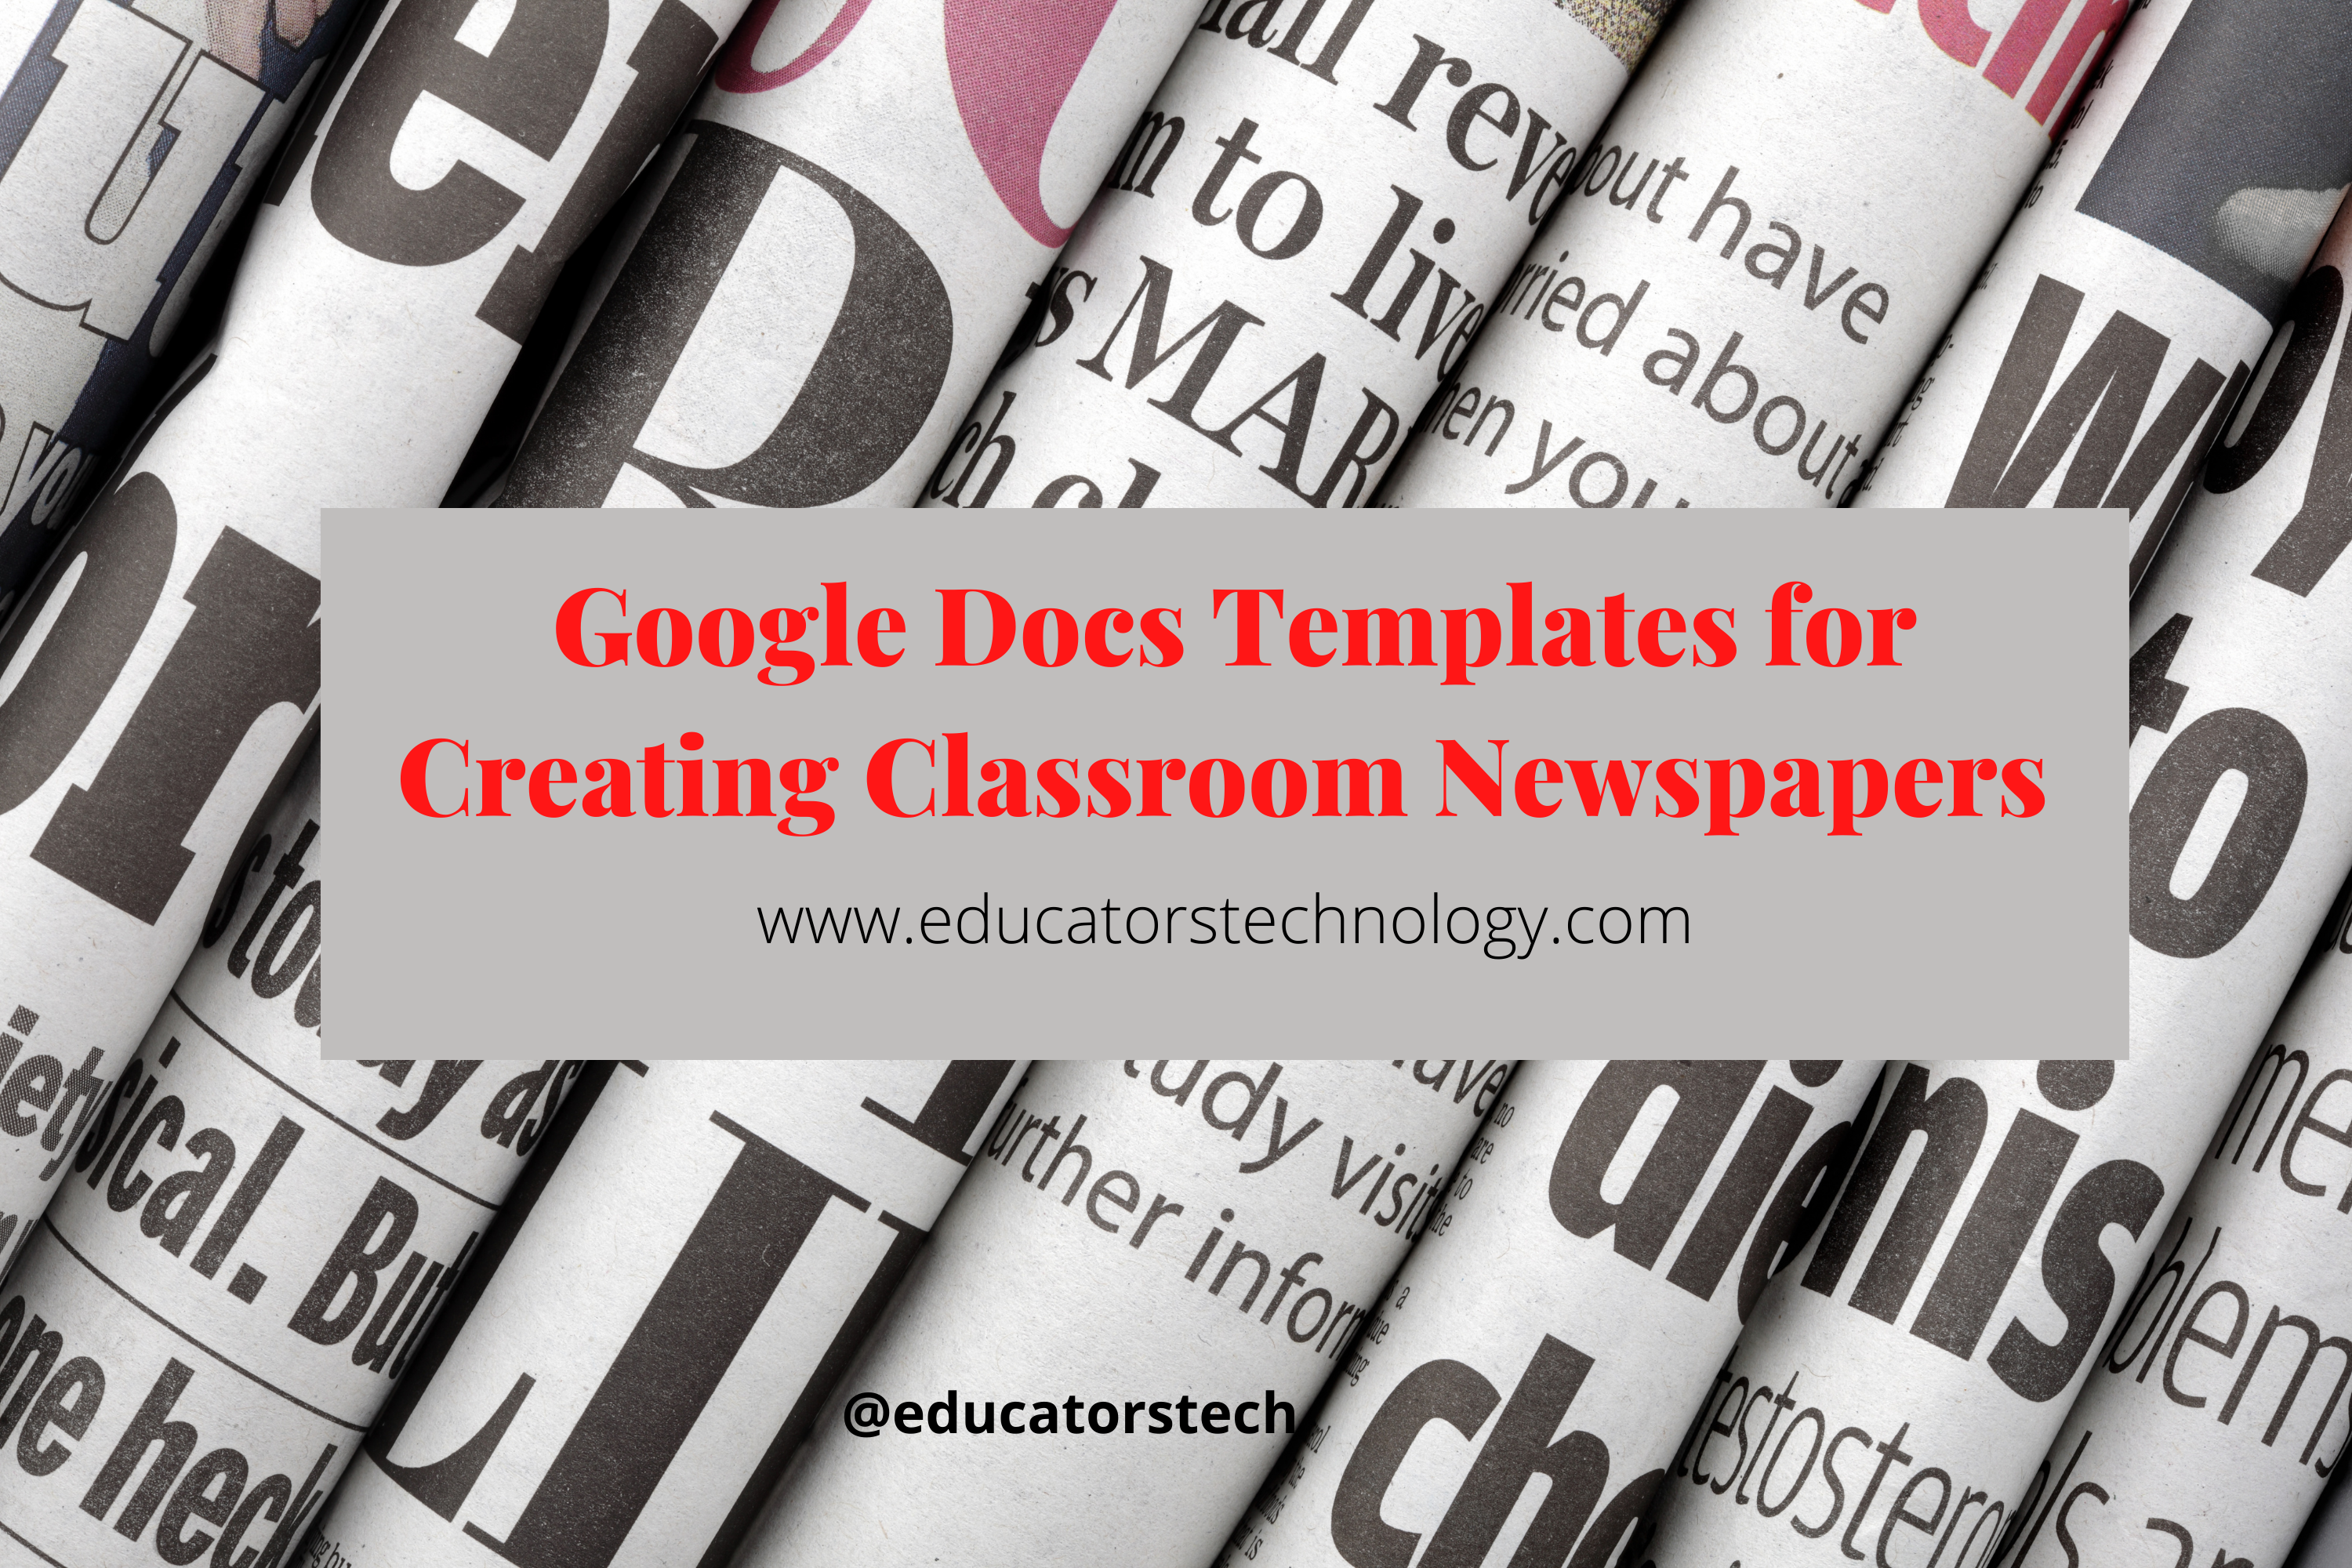 5 Handy Google Docs Templates for Creating Classroom Newspapers